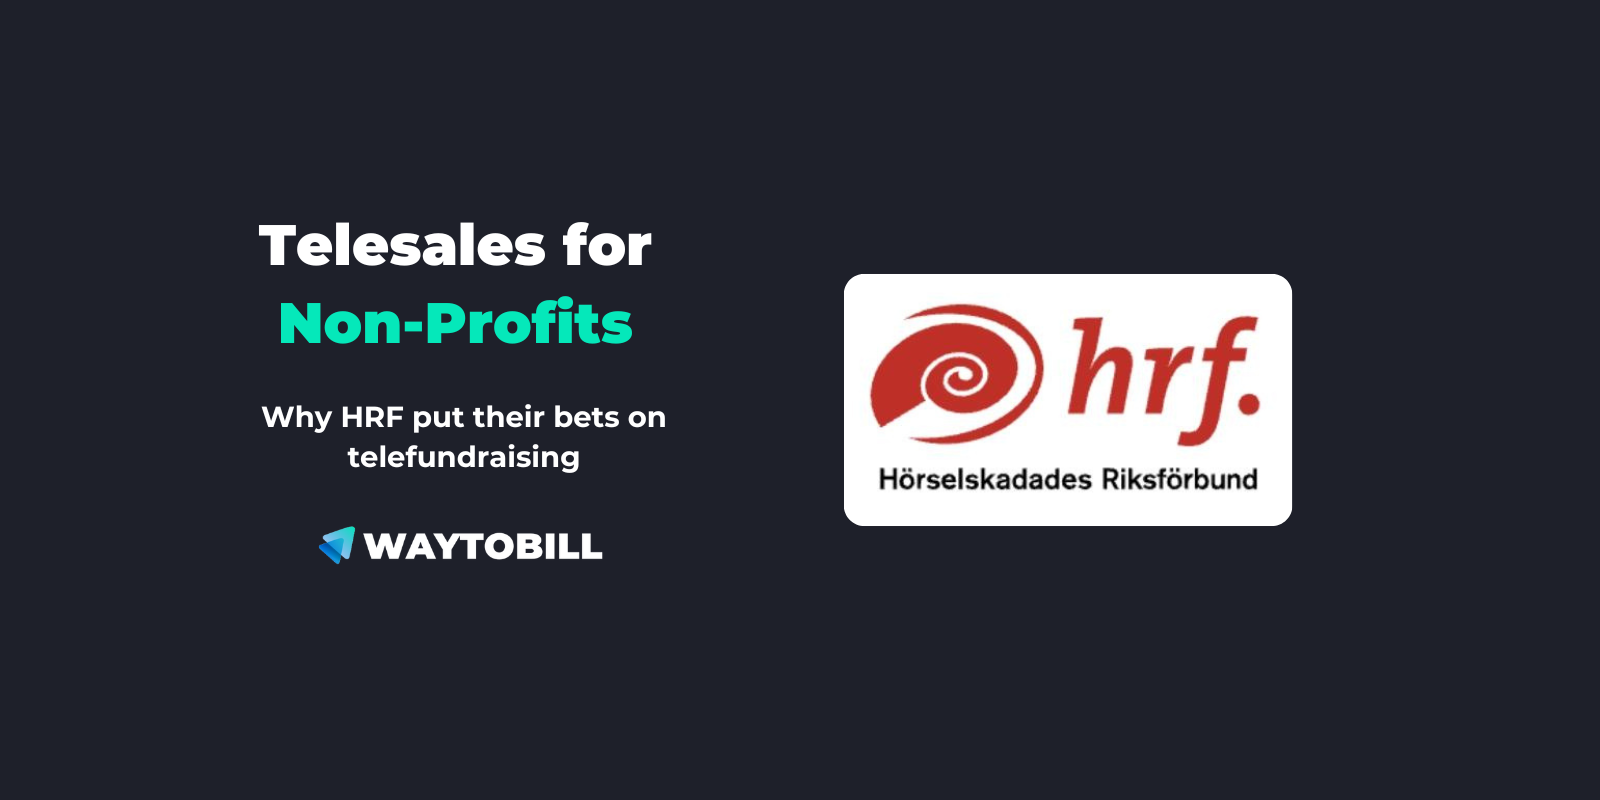 Telesales for Non-Profits: Why HRF Put Their Bets on Telefundraising